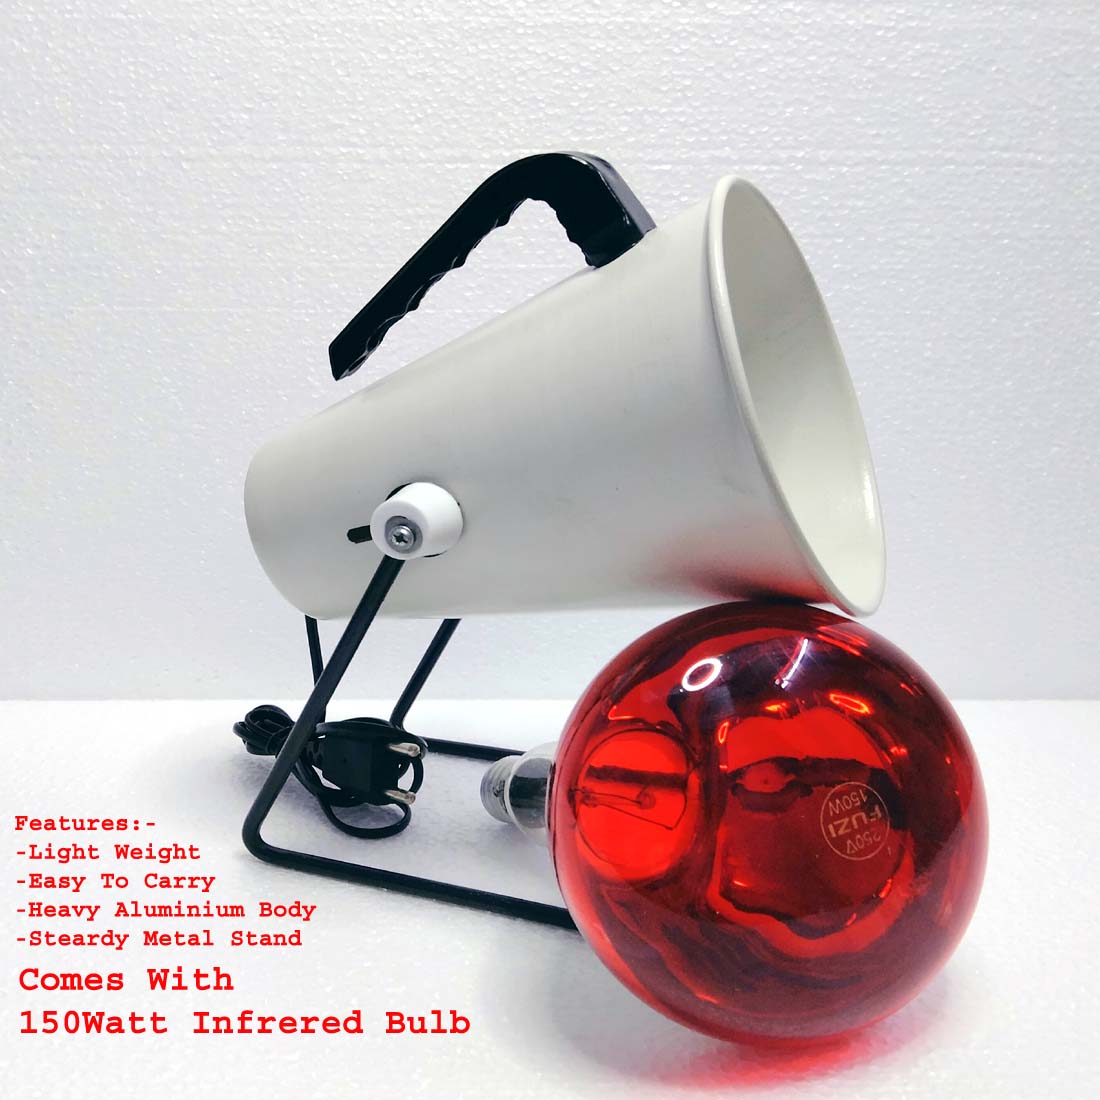 Portable Infrared Lamp For Pain Relief (Handy)